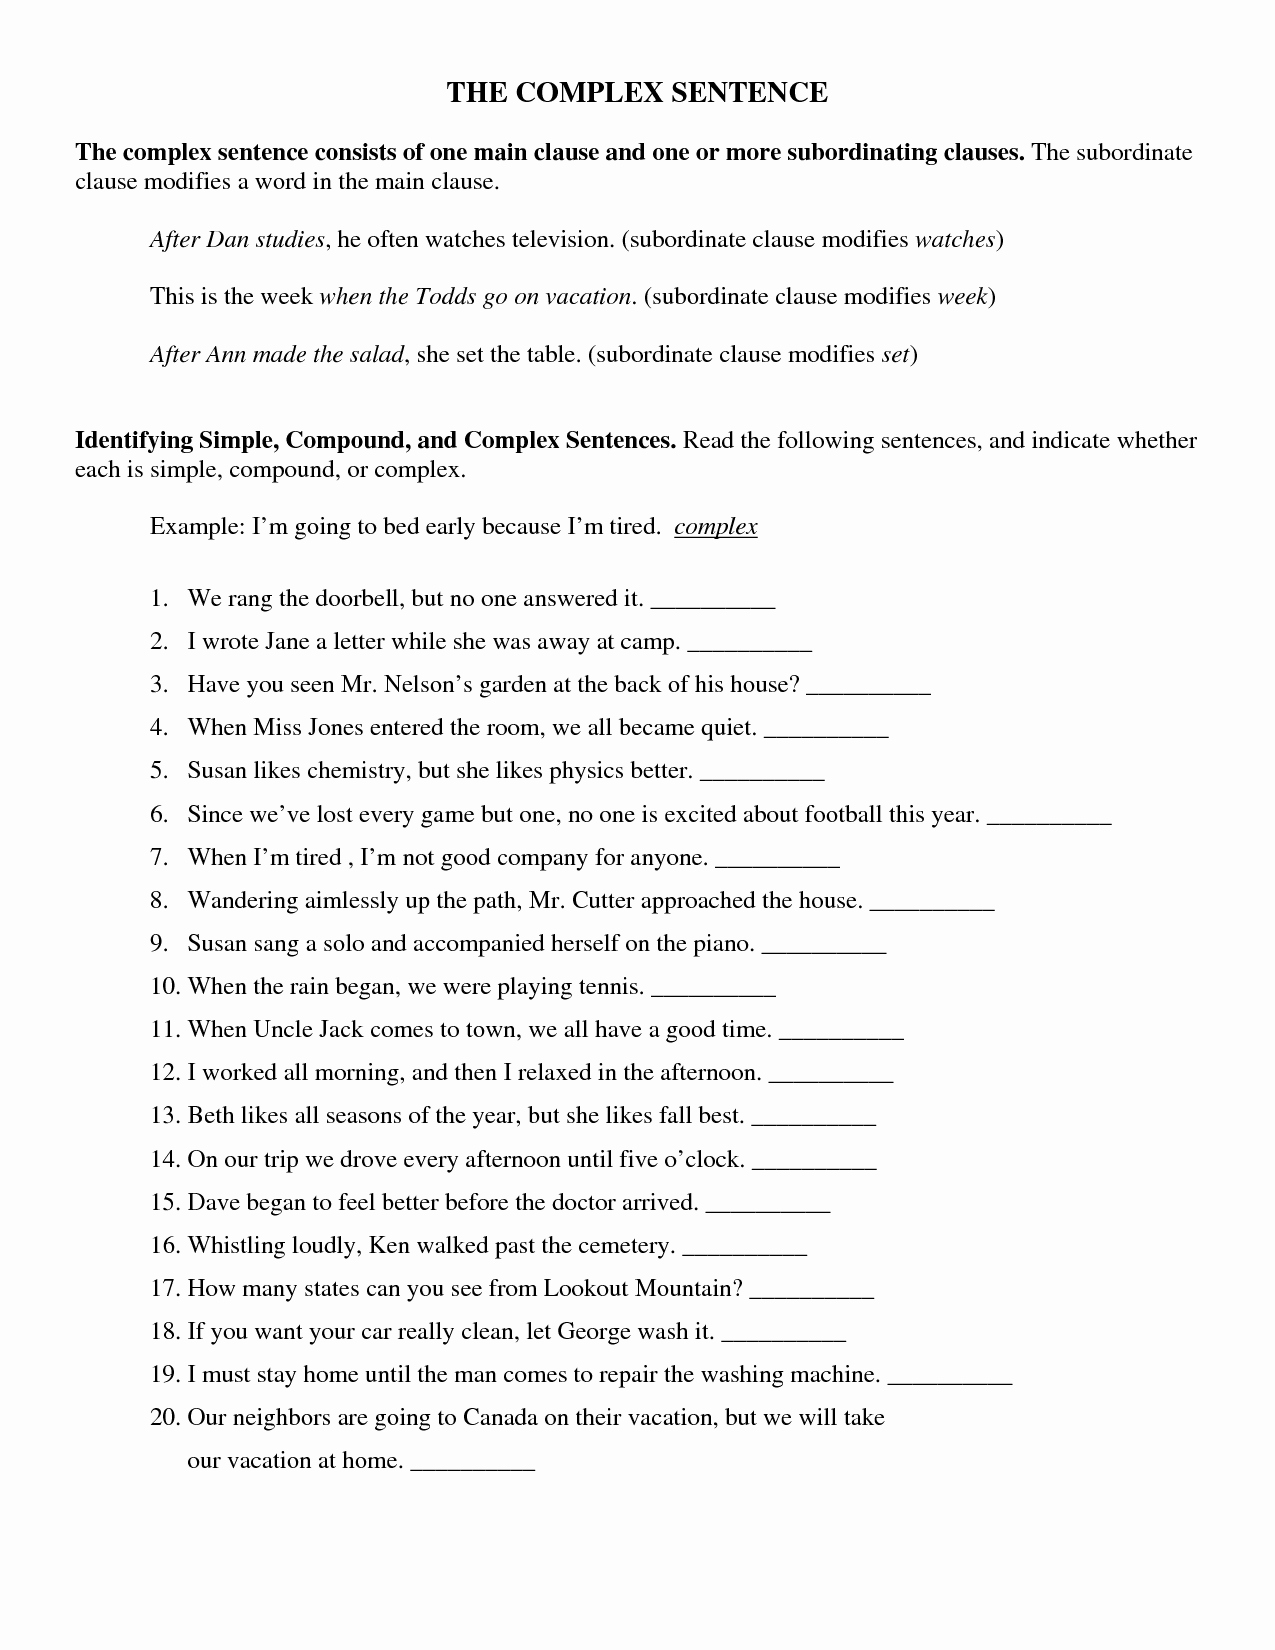 Complex Sentences Worksheets with Answers Awesome Simple Pound Plex Sentences Worksheet Yahoo Image